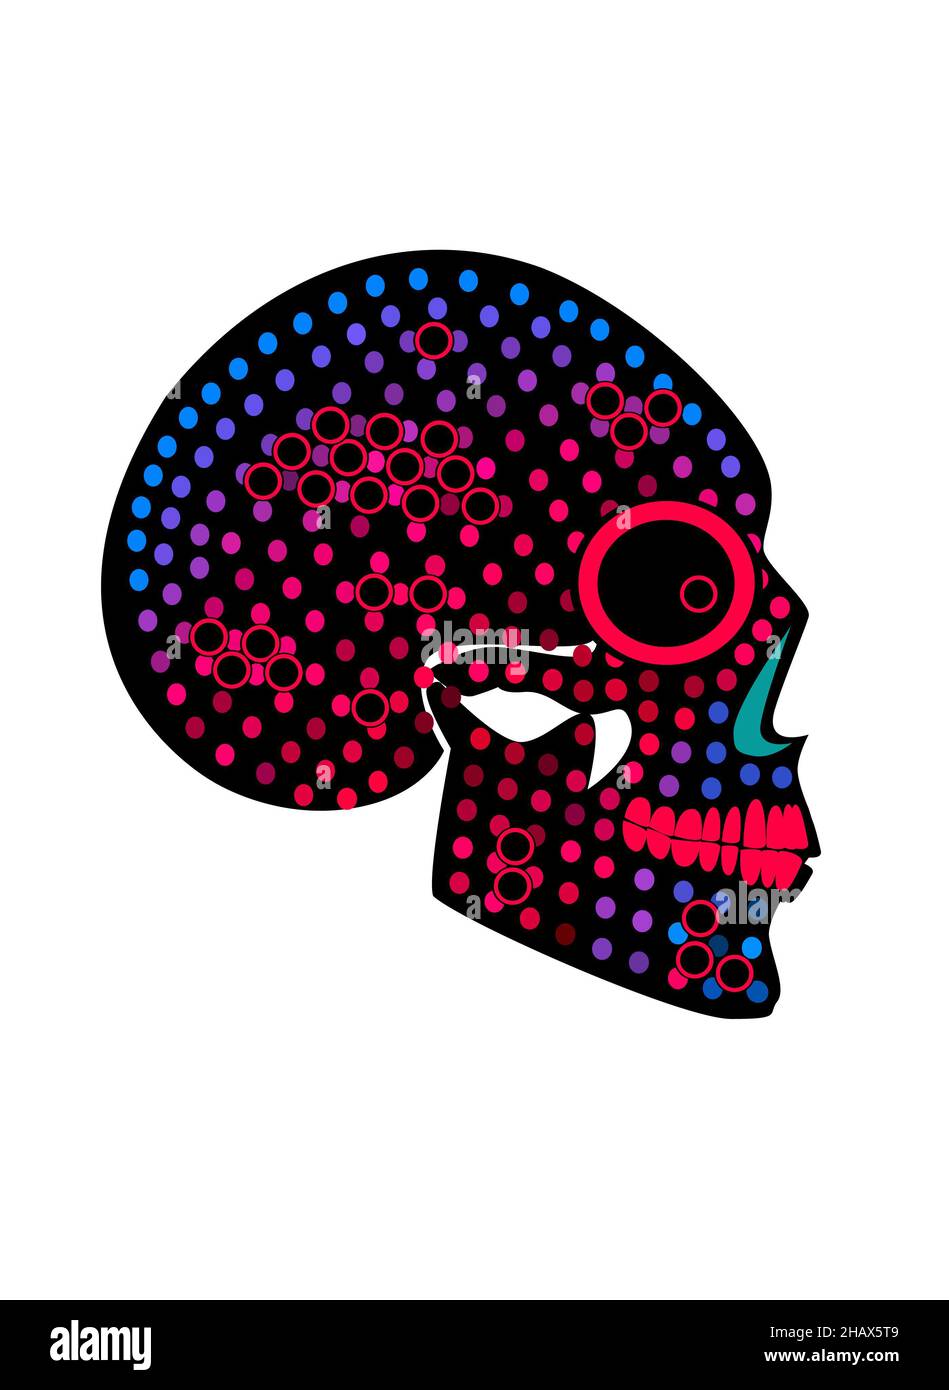 Skull icon halftone neon color background for fashion design patterns and  tattoos Stock Photo  Alamy